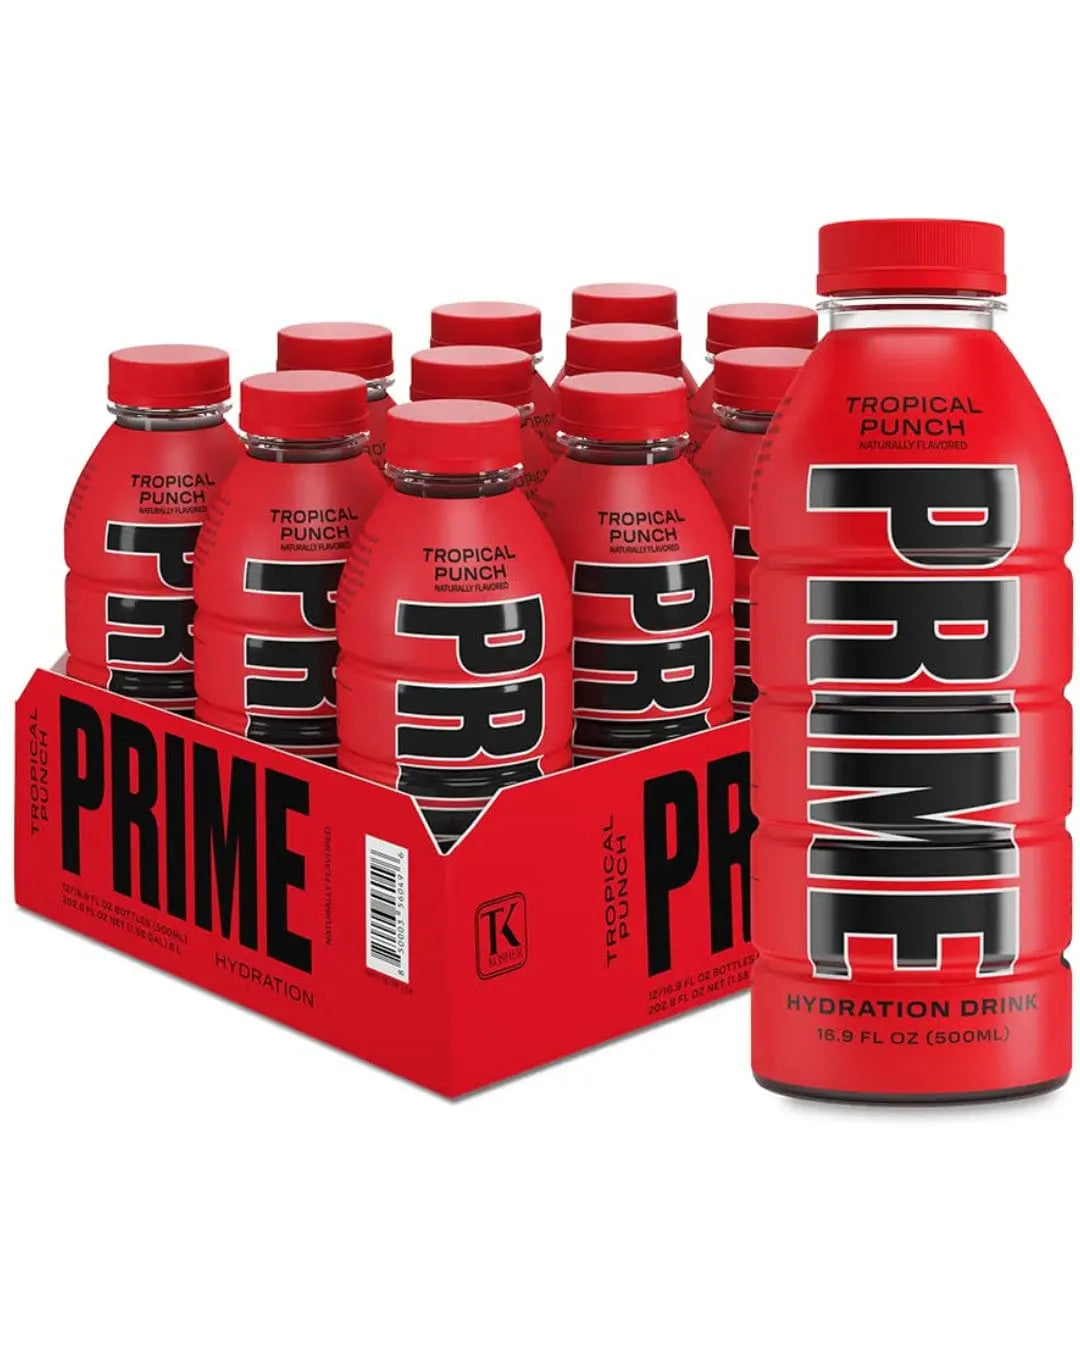 Prime Tropical Punch Hydration Drink Multipack, 12 x 500 ml Soft Drinks & Mixers 810116120512